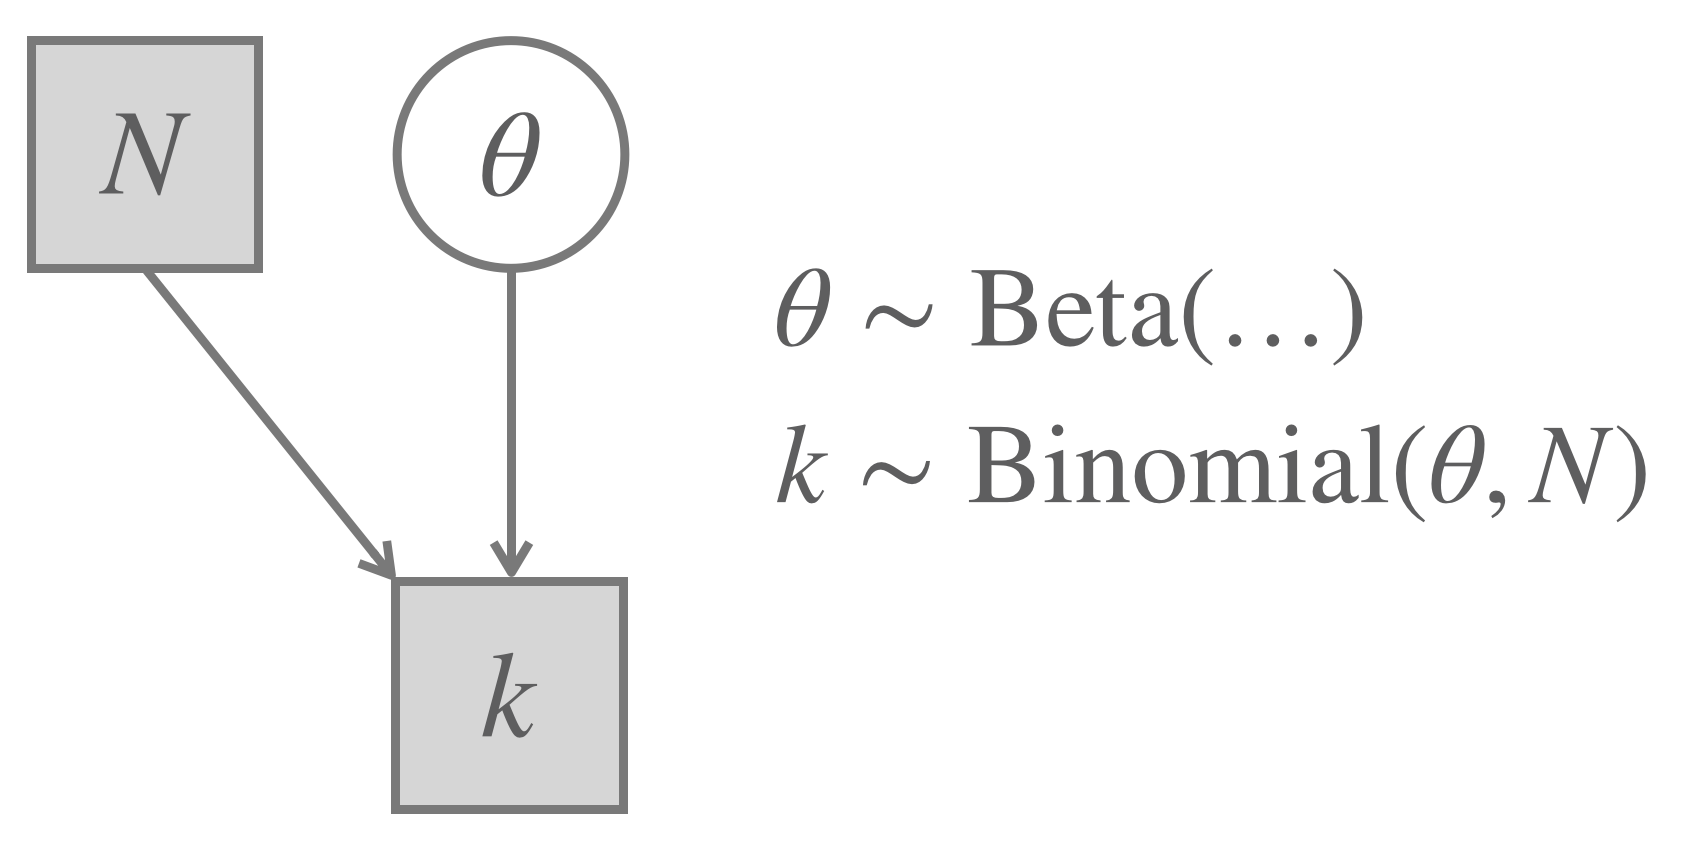 The Binomial Model. Notice that any specific Beta prior shape would yield what we here call a Binomial Model, which is why there are no concrete shape parameters given in this graph.